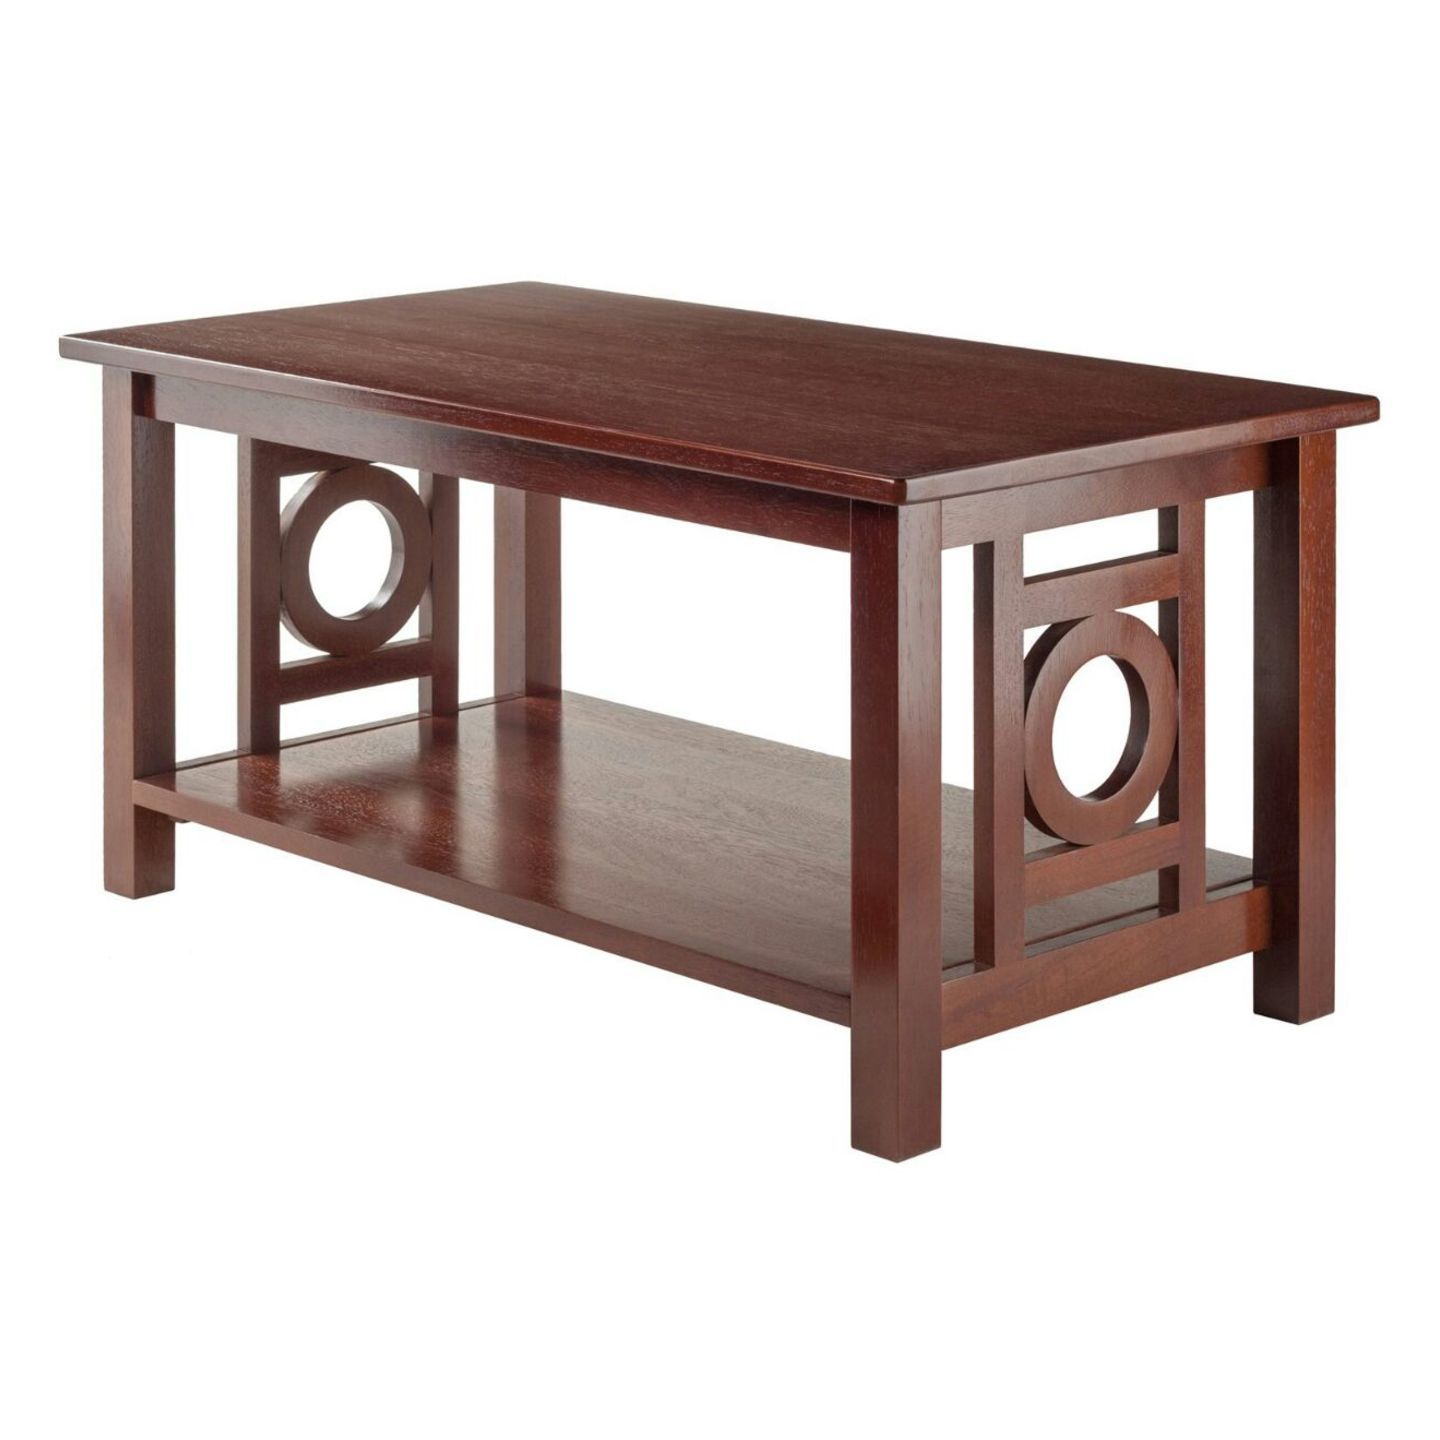 DW Center Table C-035 Plan Top In Brown Colour